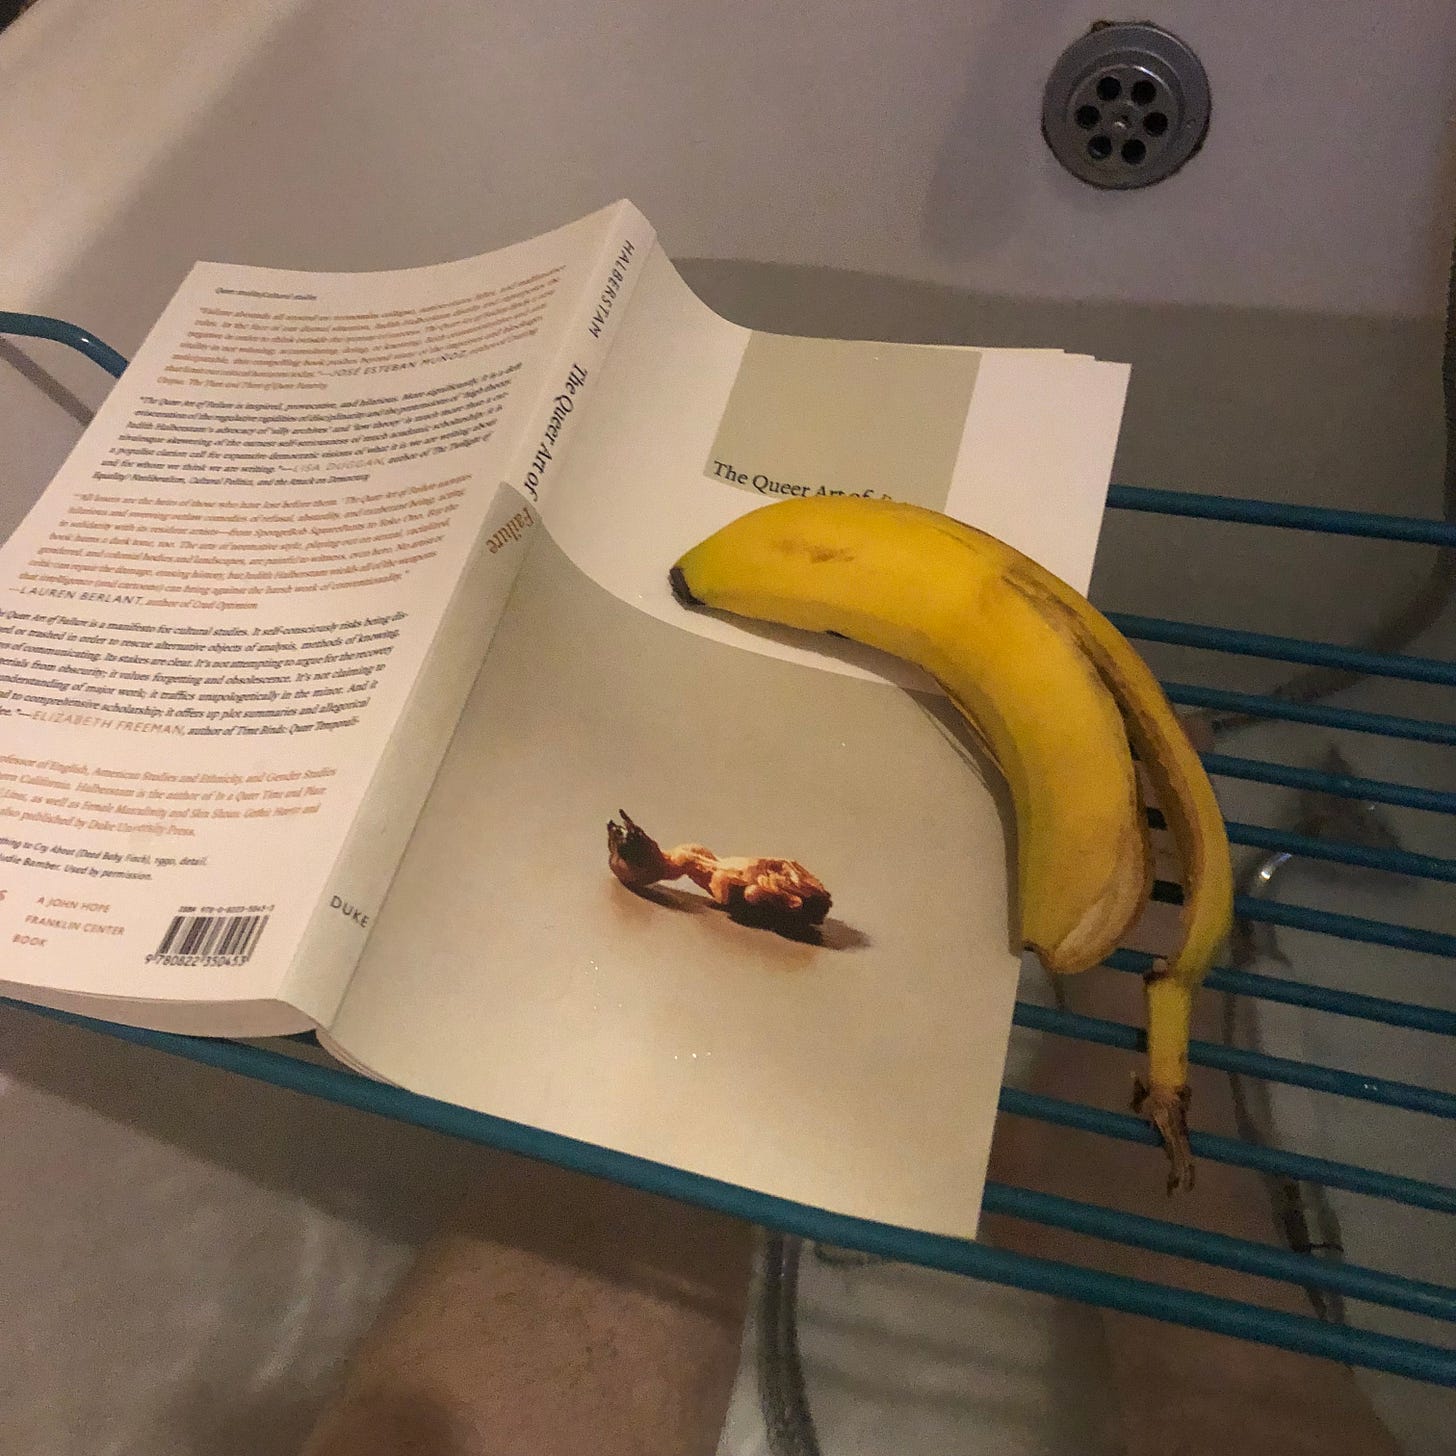 A photo of a rack held over a bathtub, with a book, The Queer Art of Failure by Jack Halberstam, and a half eaten banana. Someone's legs are visible in the water beneath. 